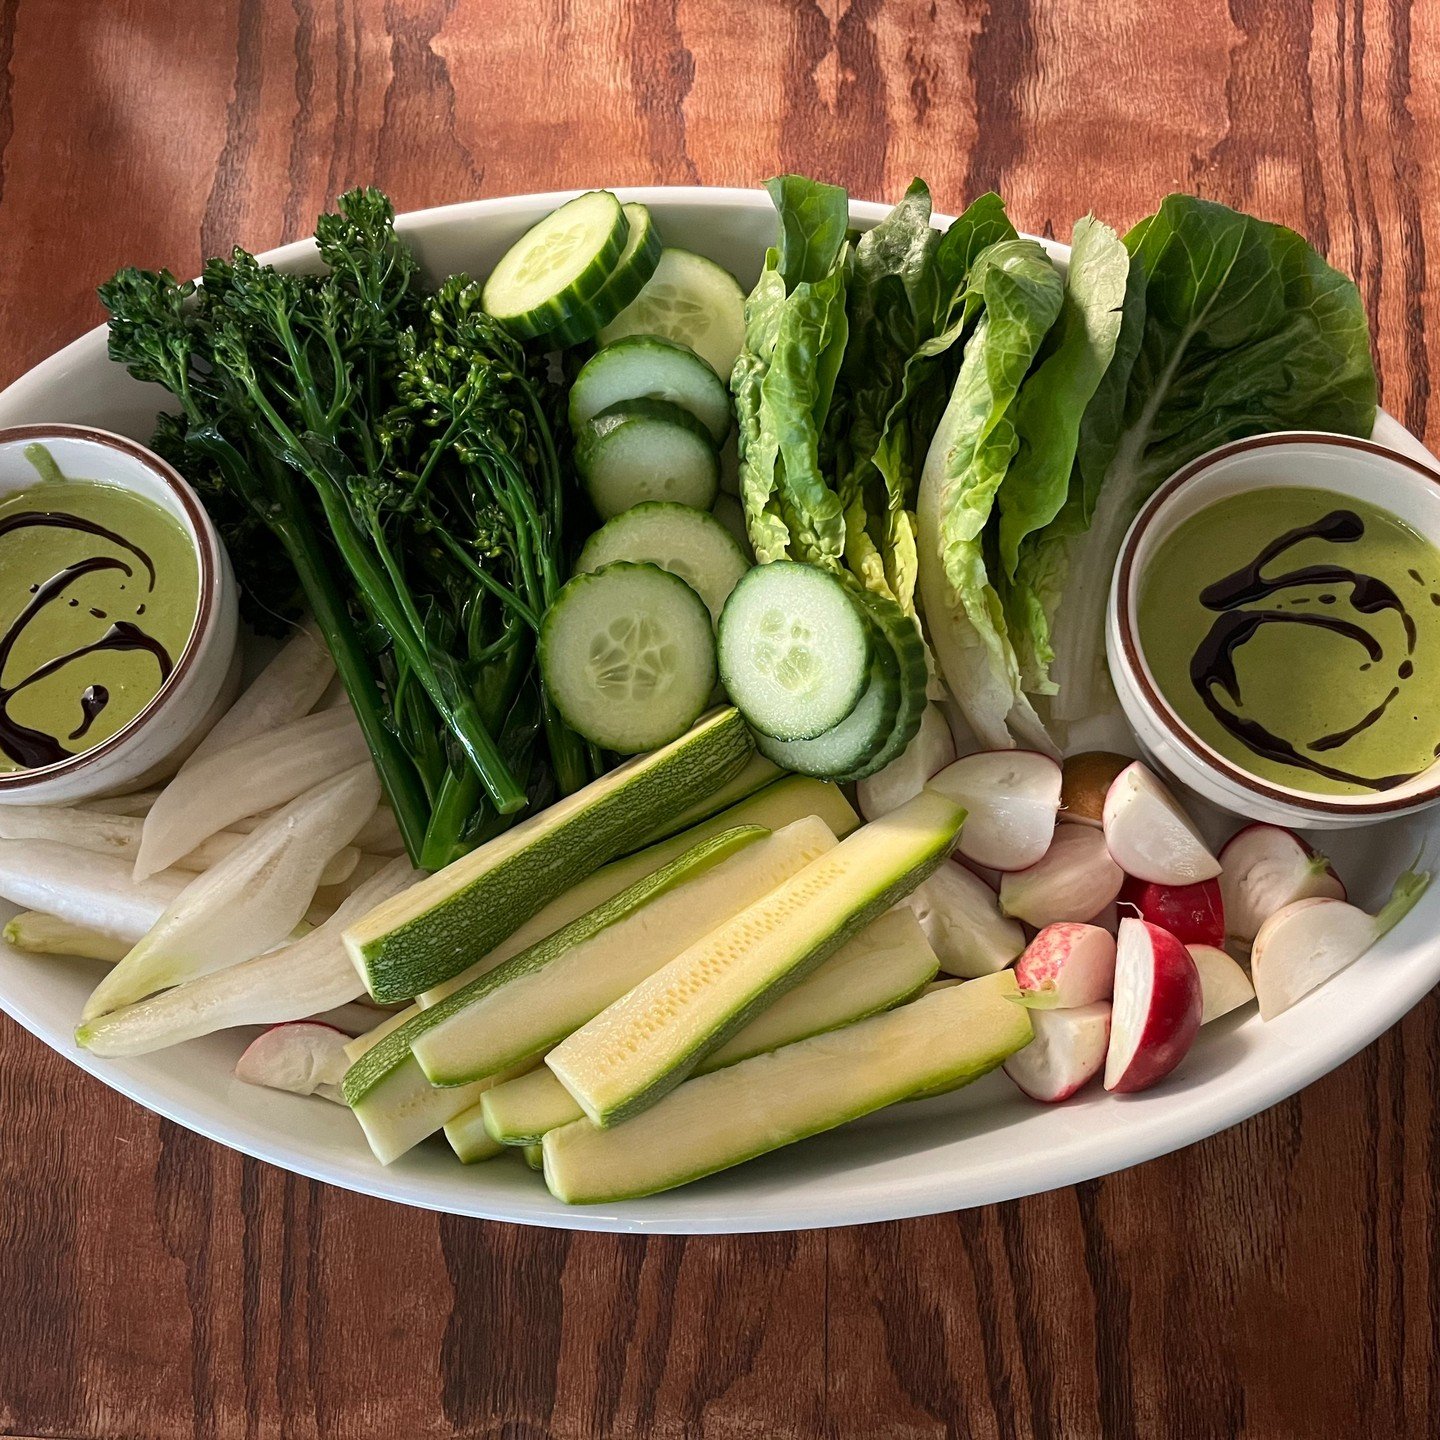 Spring has sprung and it's party season! Our patio is open every day and Chef Jason has created a special menu of platters for your private event. Many of these dishes incorporate the freshest seasonal vegetables, including our Crudites with Pumpkin 